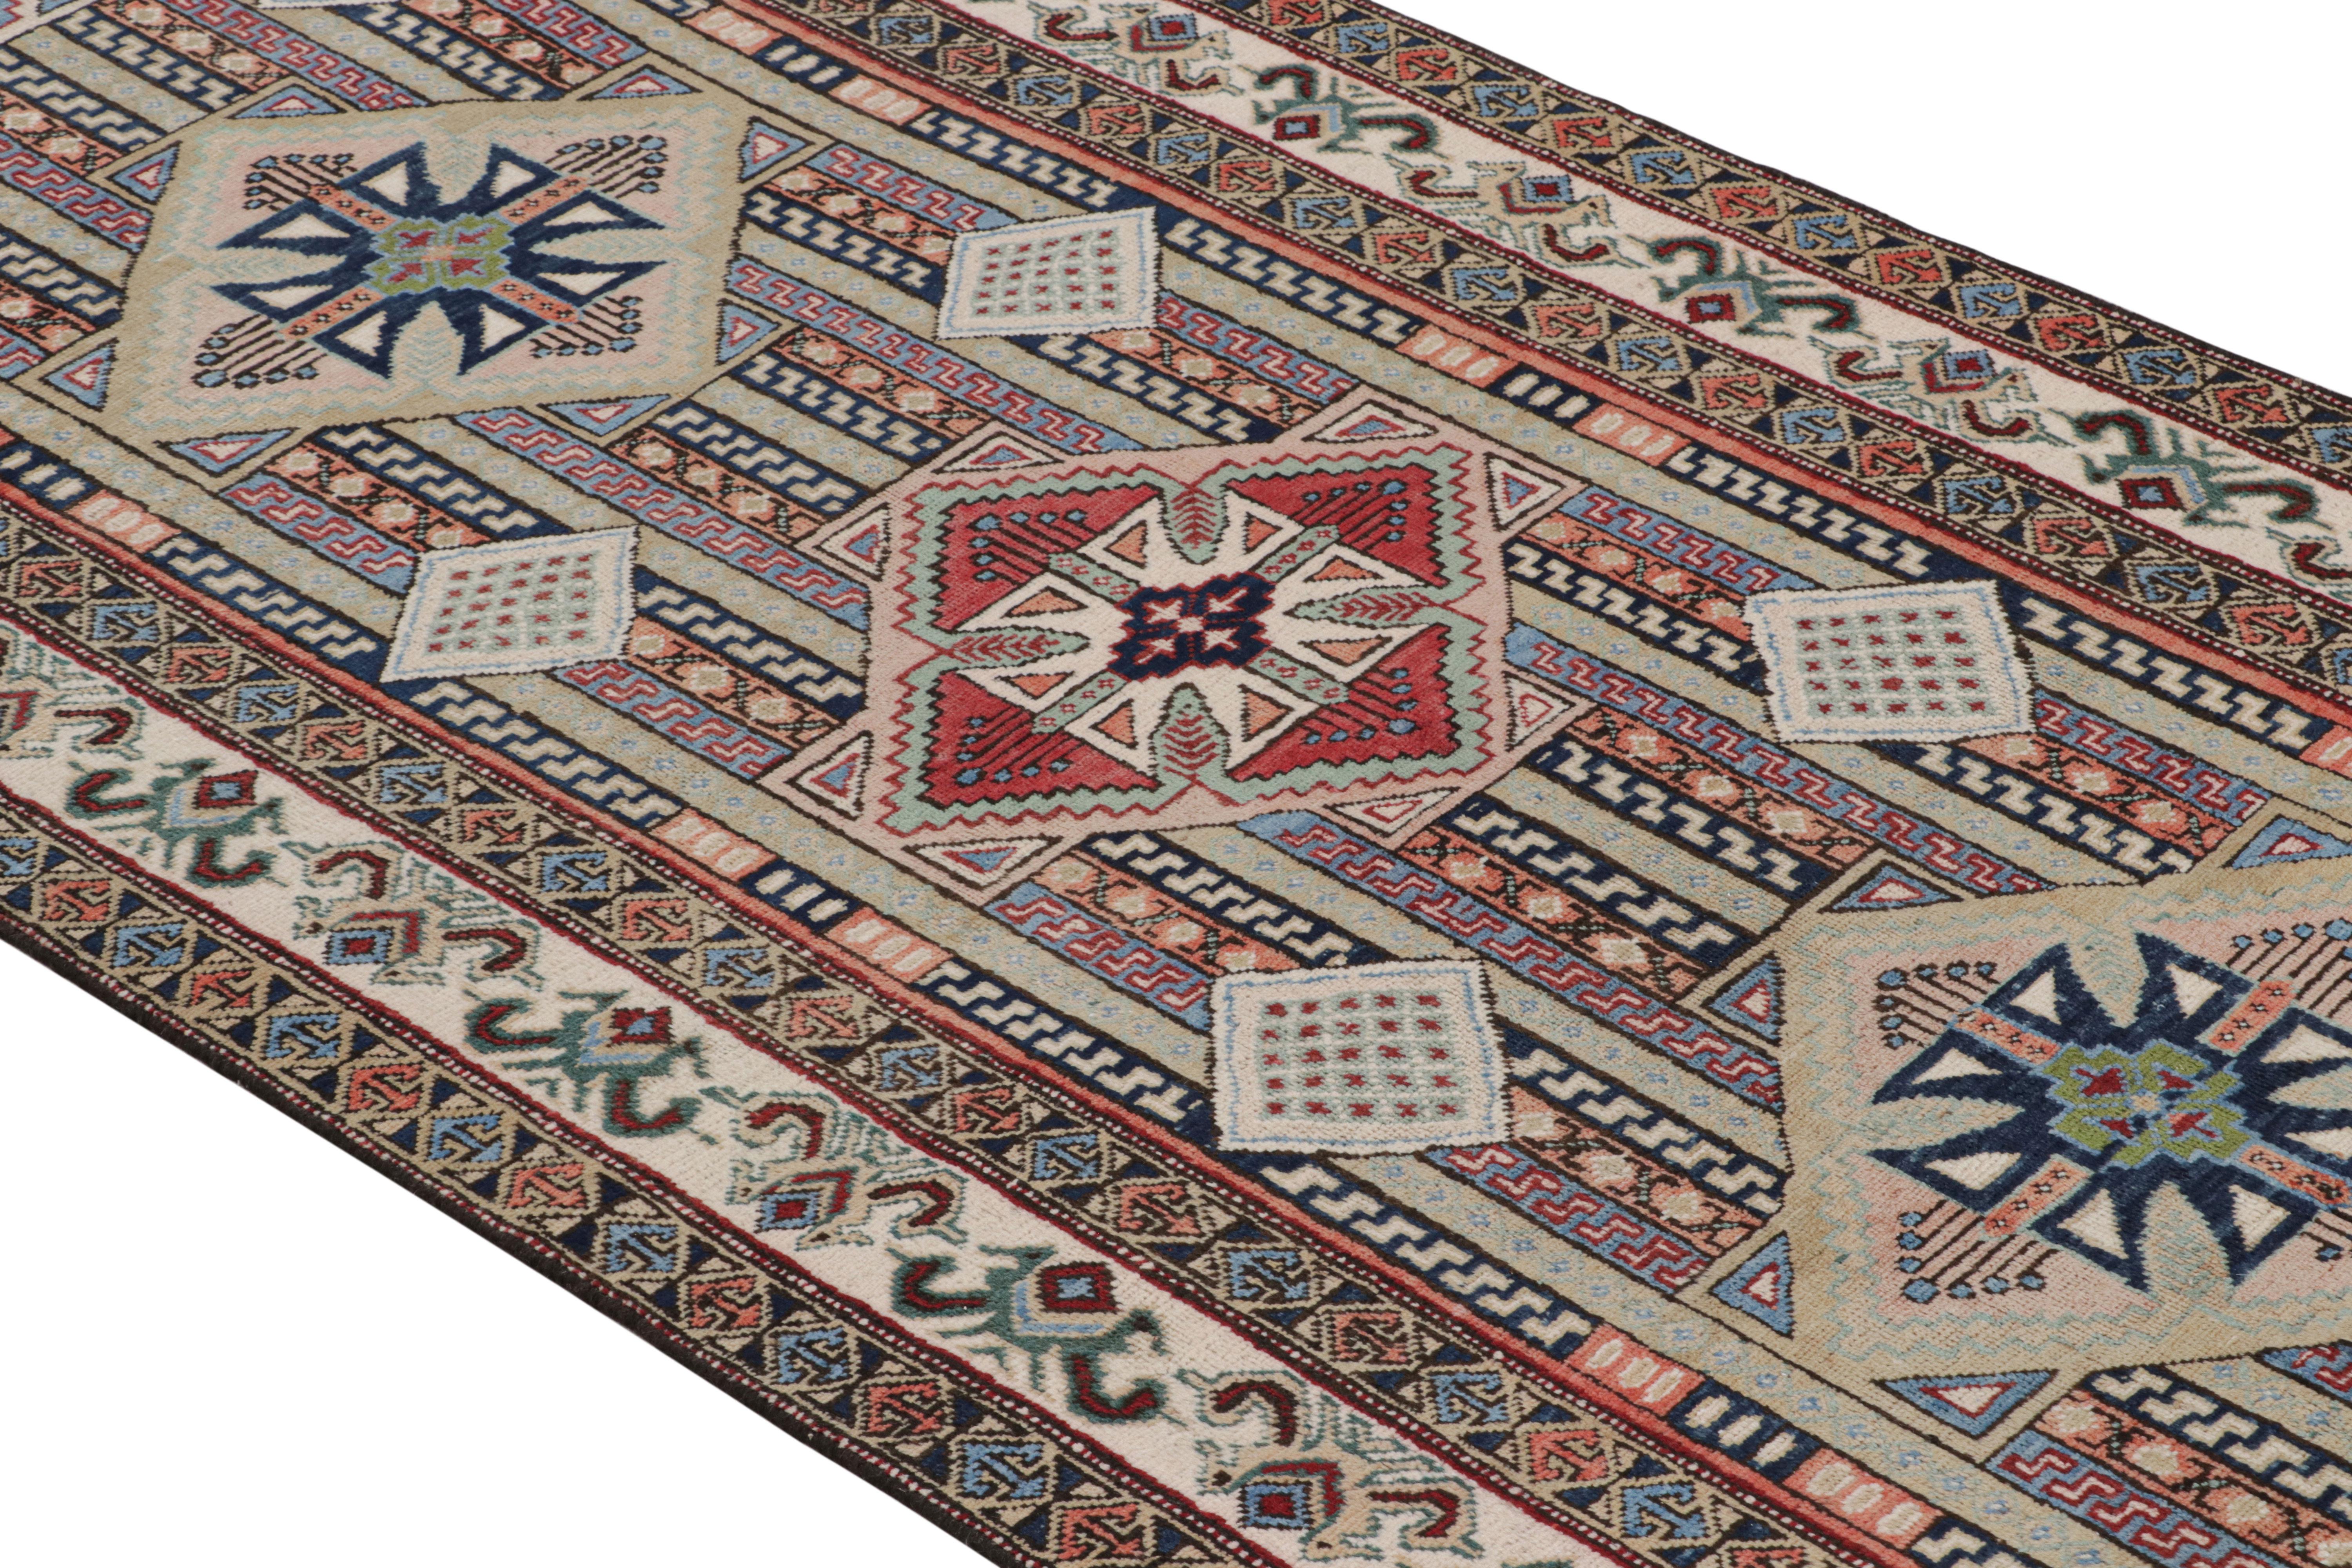 Hand knotted in lush wool pile originating from Persia between 1950-1960, this vintage midcentury Azerbaijan runner enjoys both excellent condition and a notably meticulous, skillful achievement in the play of geometry and colorway variation in this